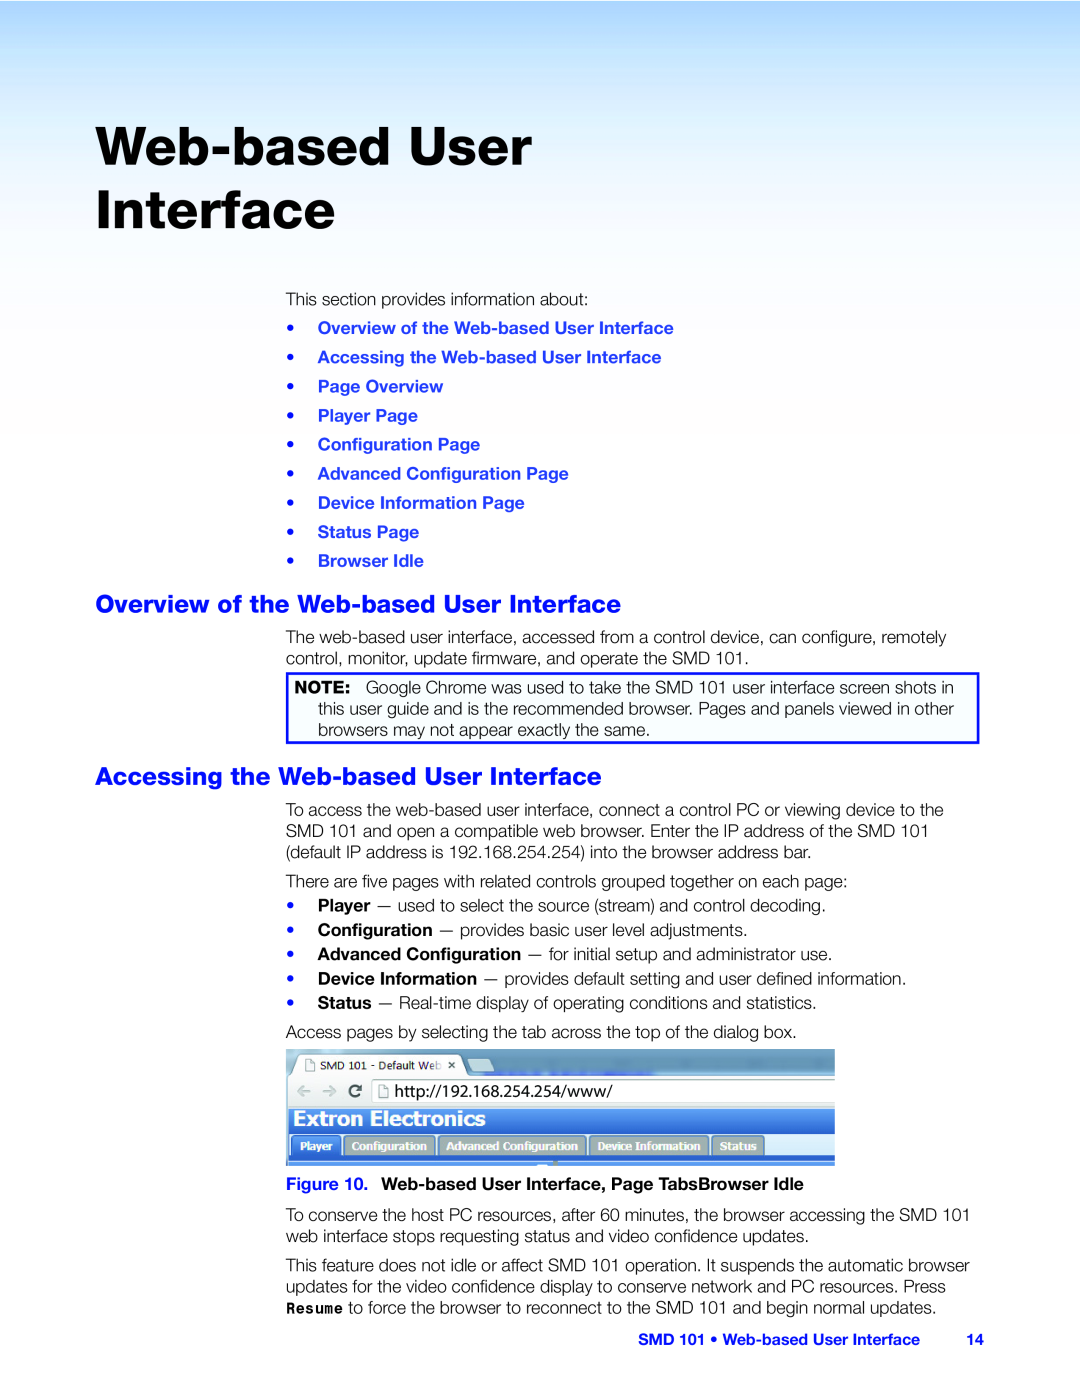 Extron electronic SMD 101 manual Overview of the Web-based User Interface, Accessing the Web-based User Interface 